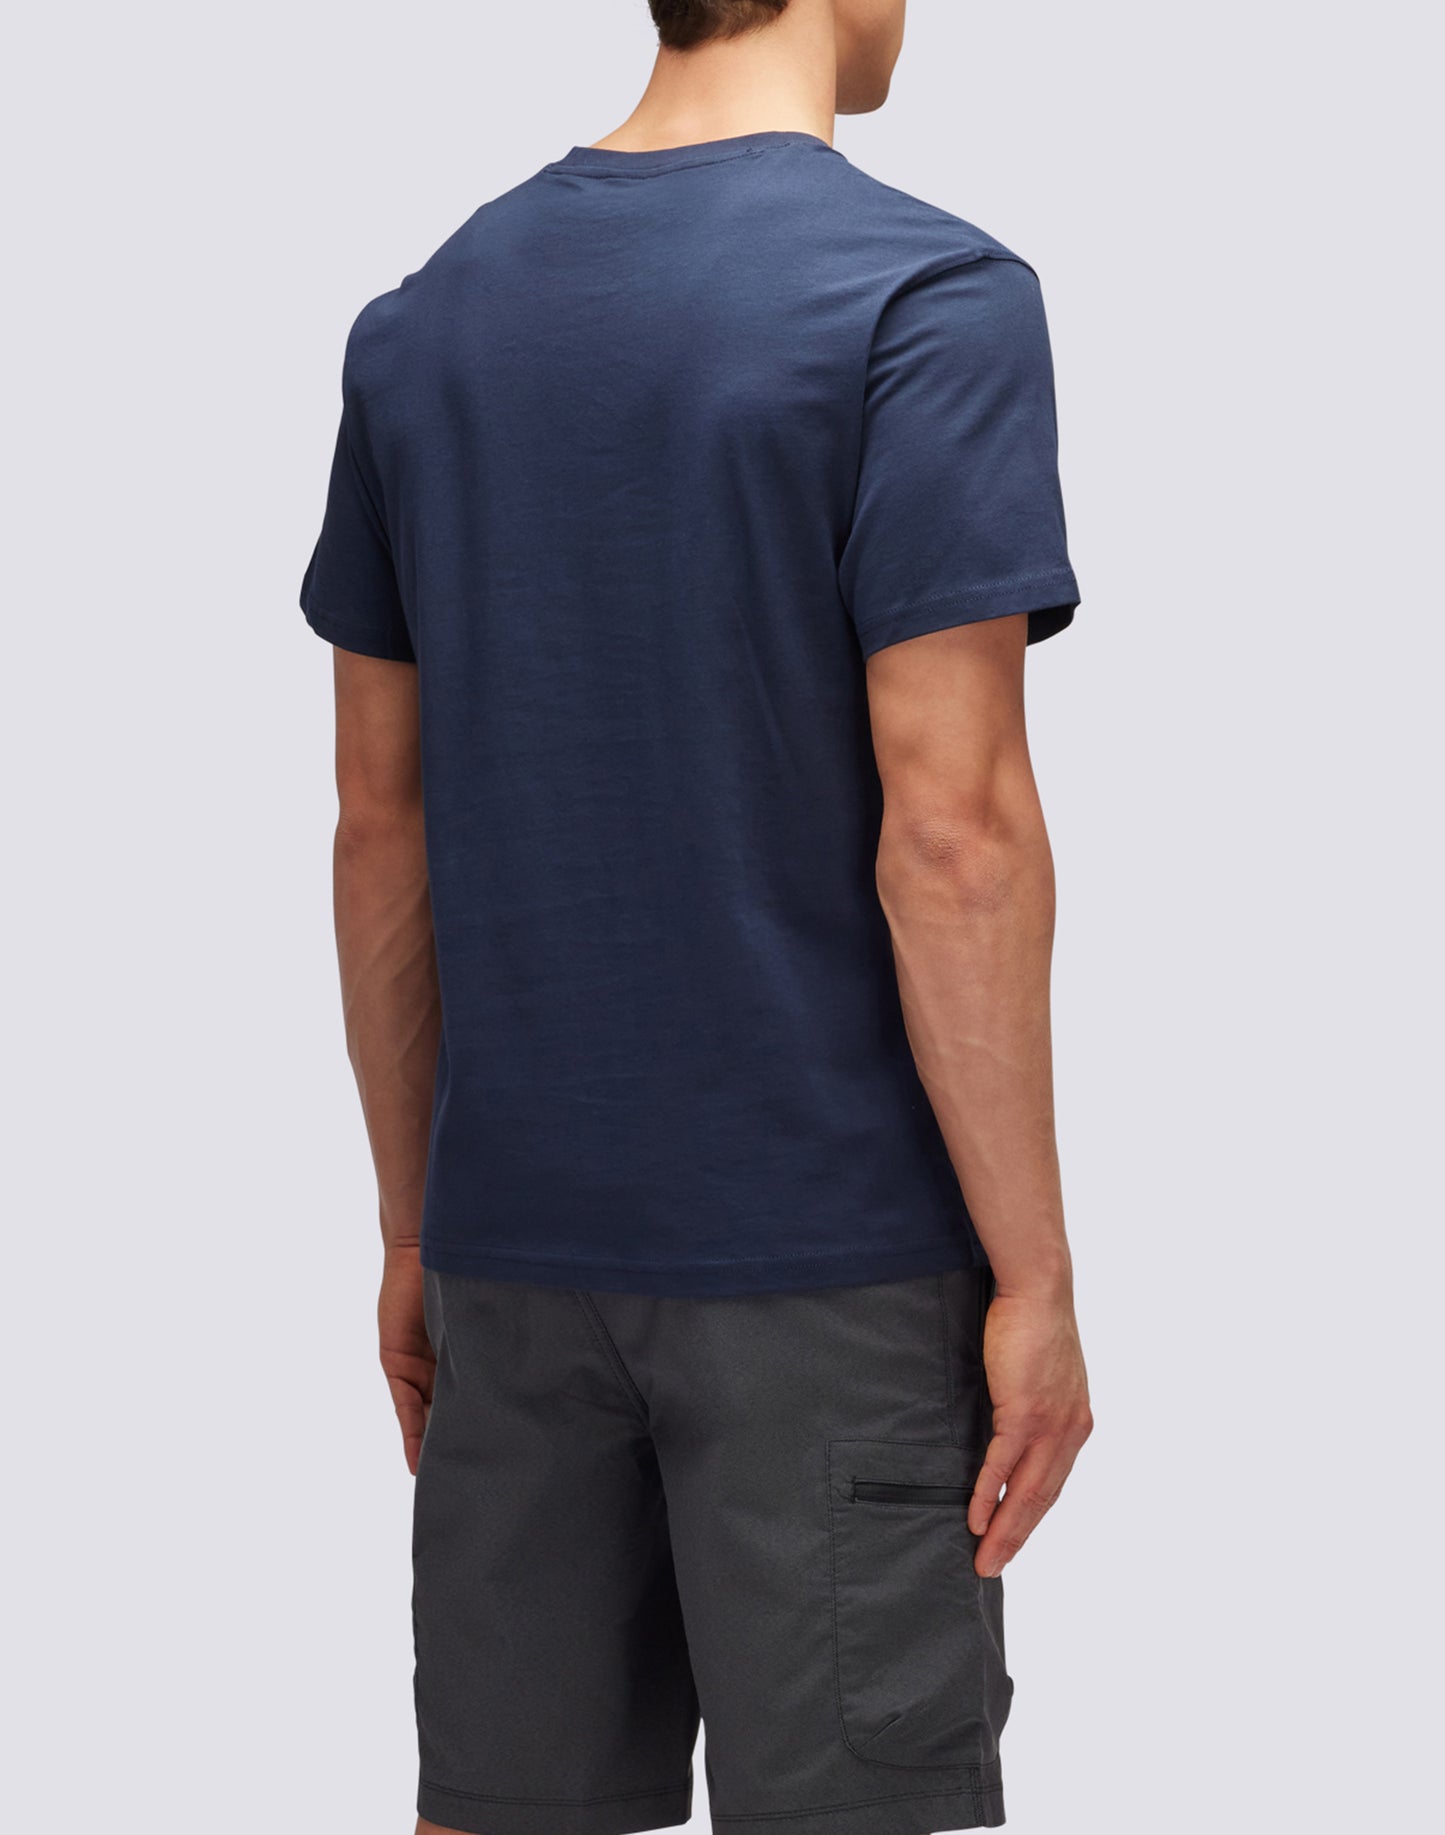 SHORT-SLEEVED T-SHIRT WITH LOGO